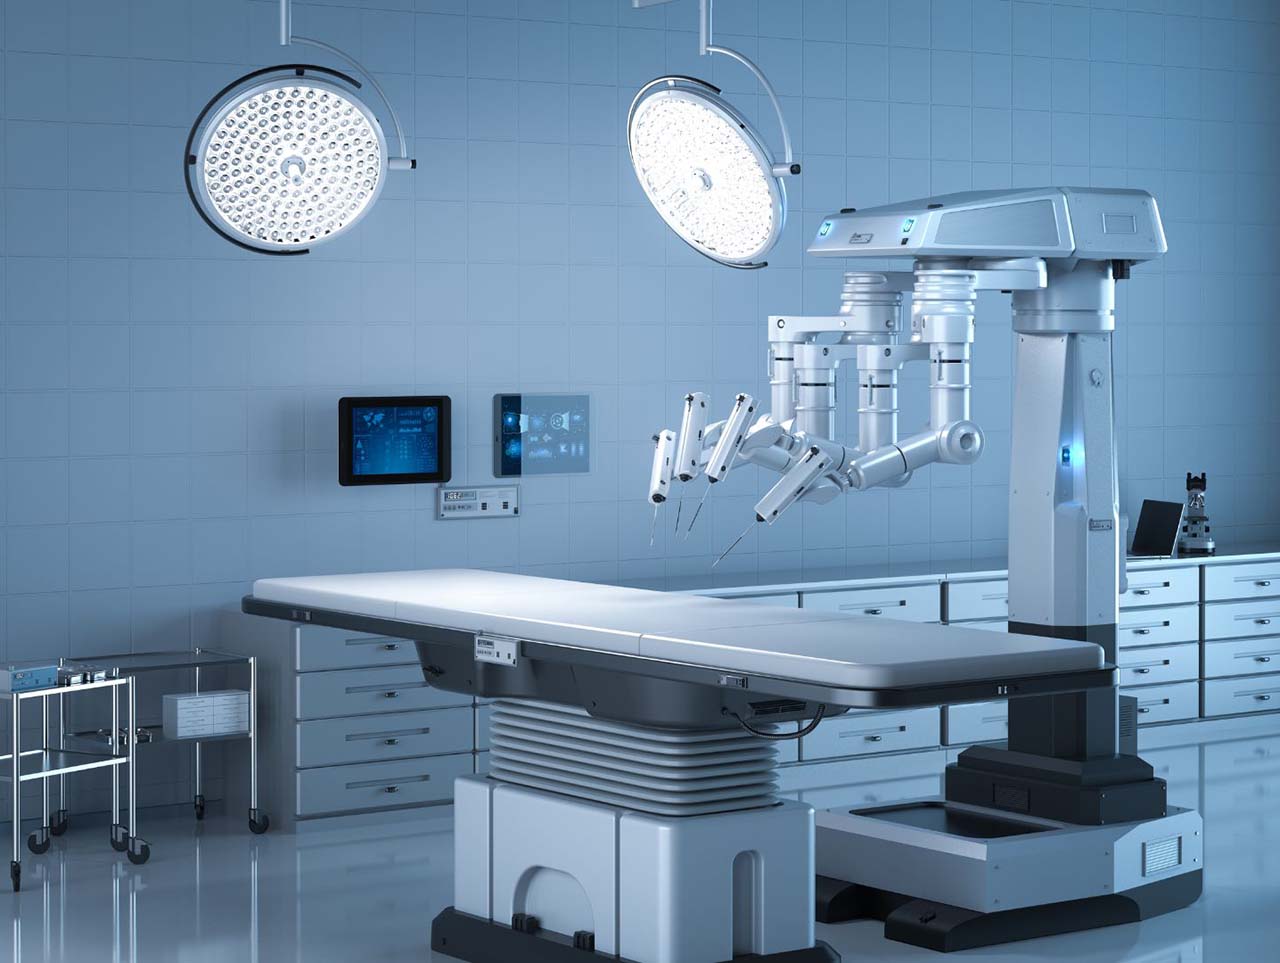 The da Vinci Surgical System enables our top robotic surgeon to perform minimally invasive surgery in Los Angeles